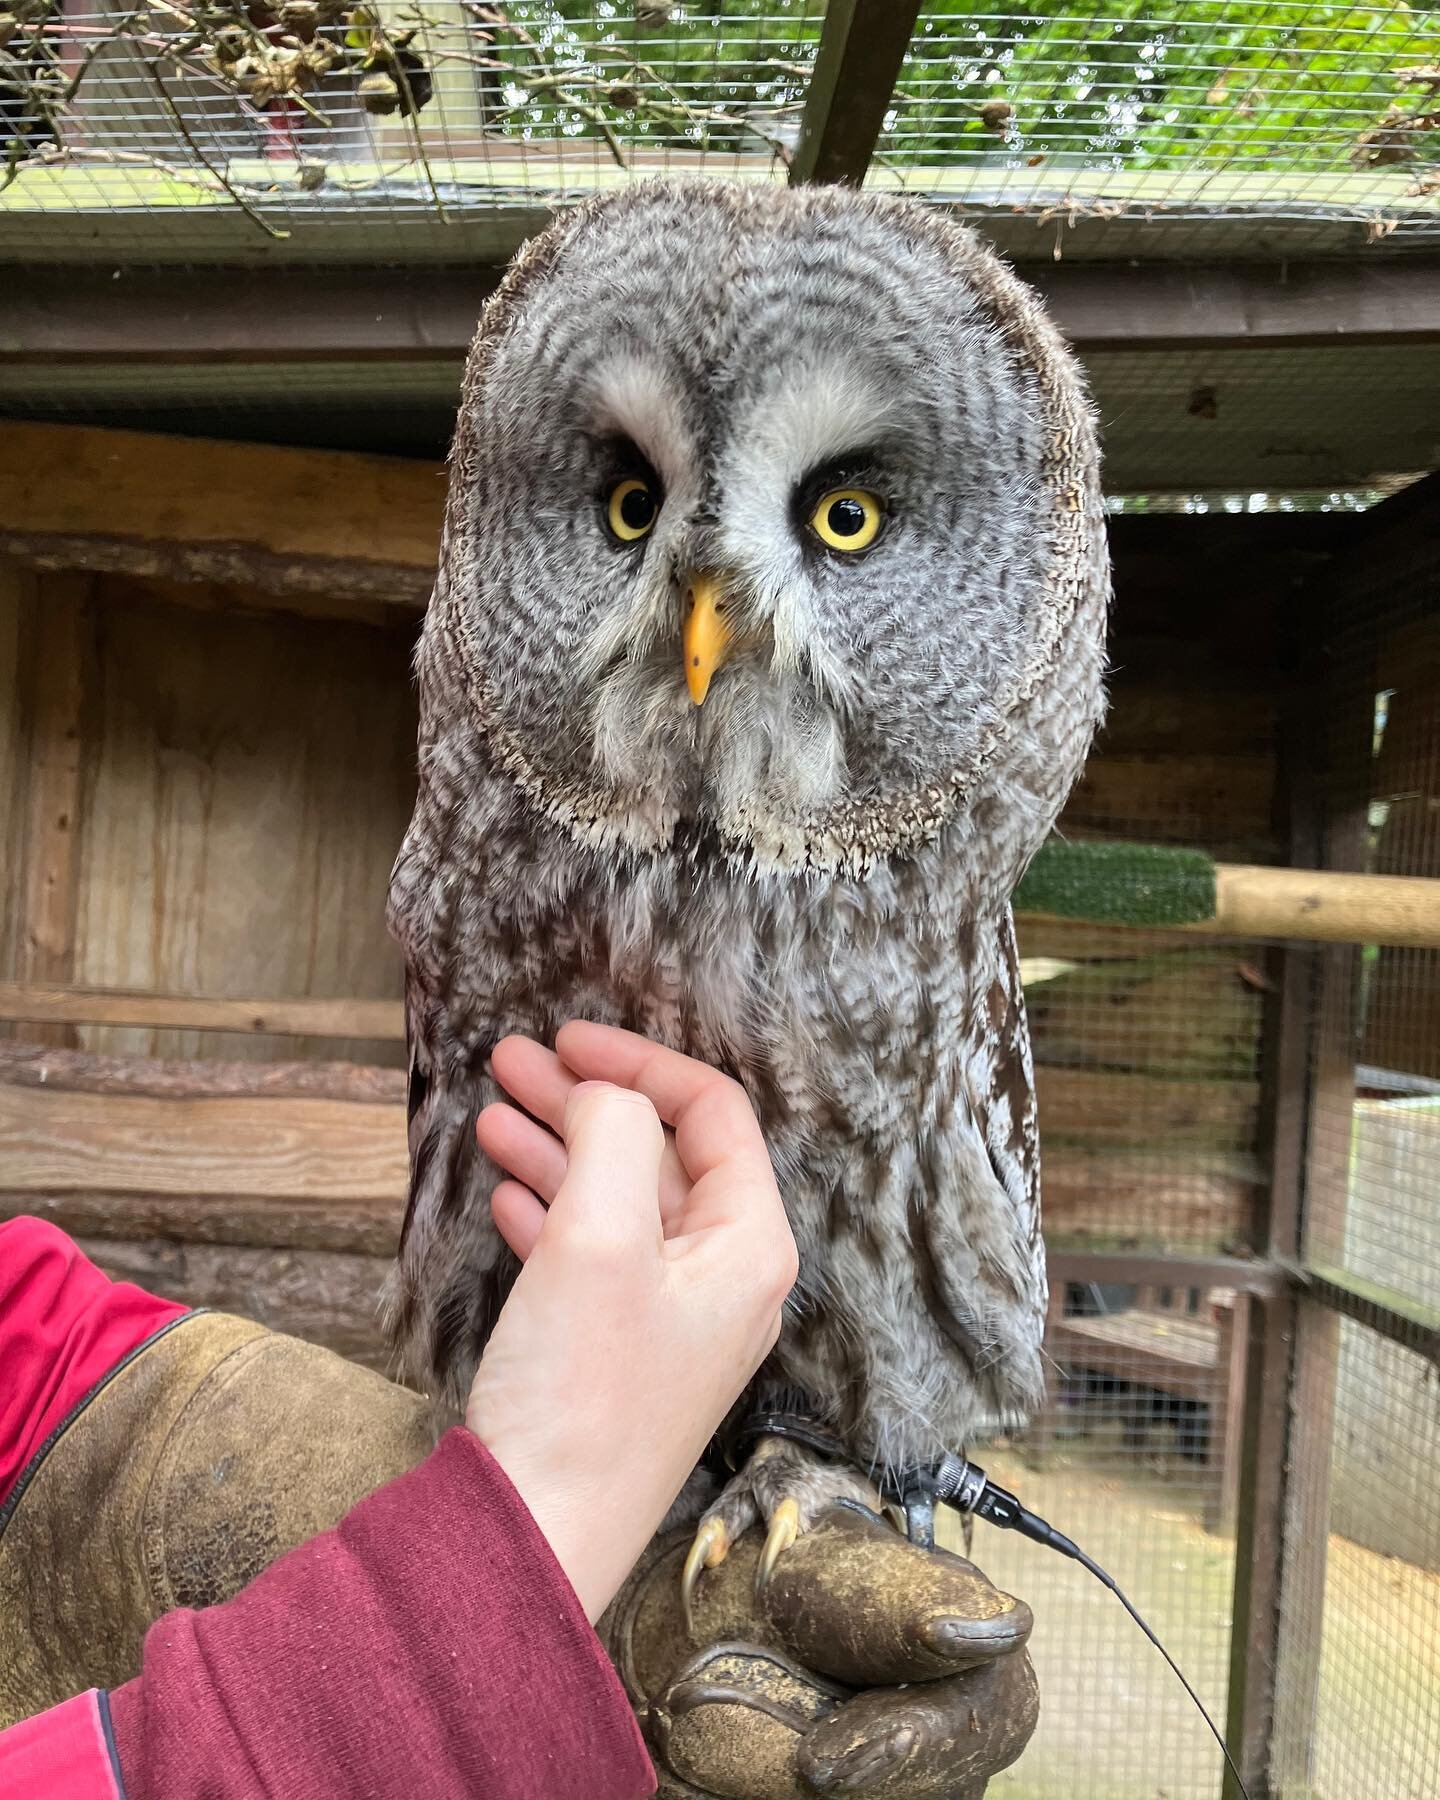 A few weekends ago, we met Strix at @mayfield_alpacas_animal_park and got to take him flying. I actually got this as a present for Jon, but it was blatantly just as much a present for me - check out my ridiculous &ldquo;A massive owl just voluntarily